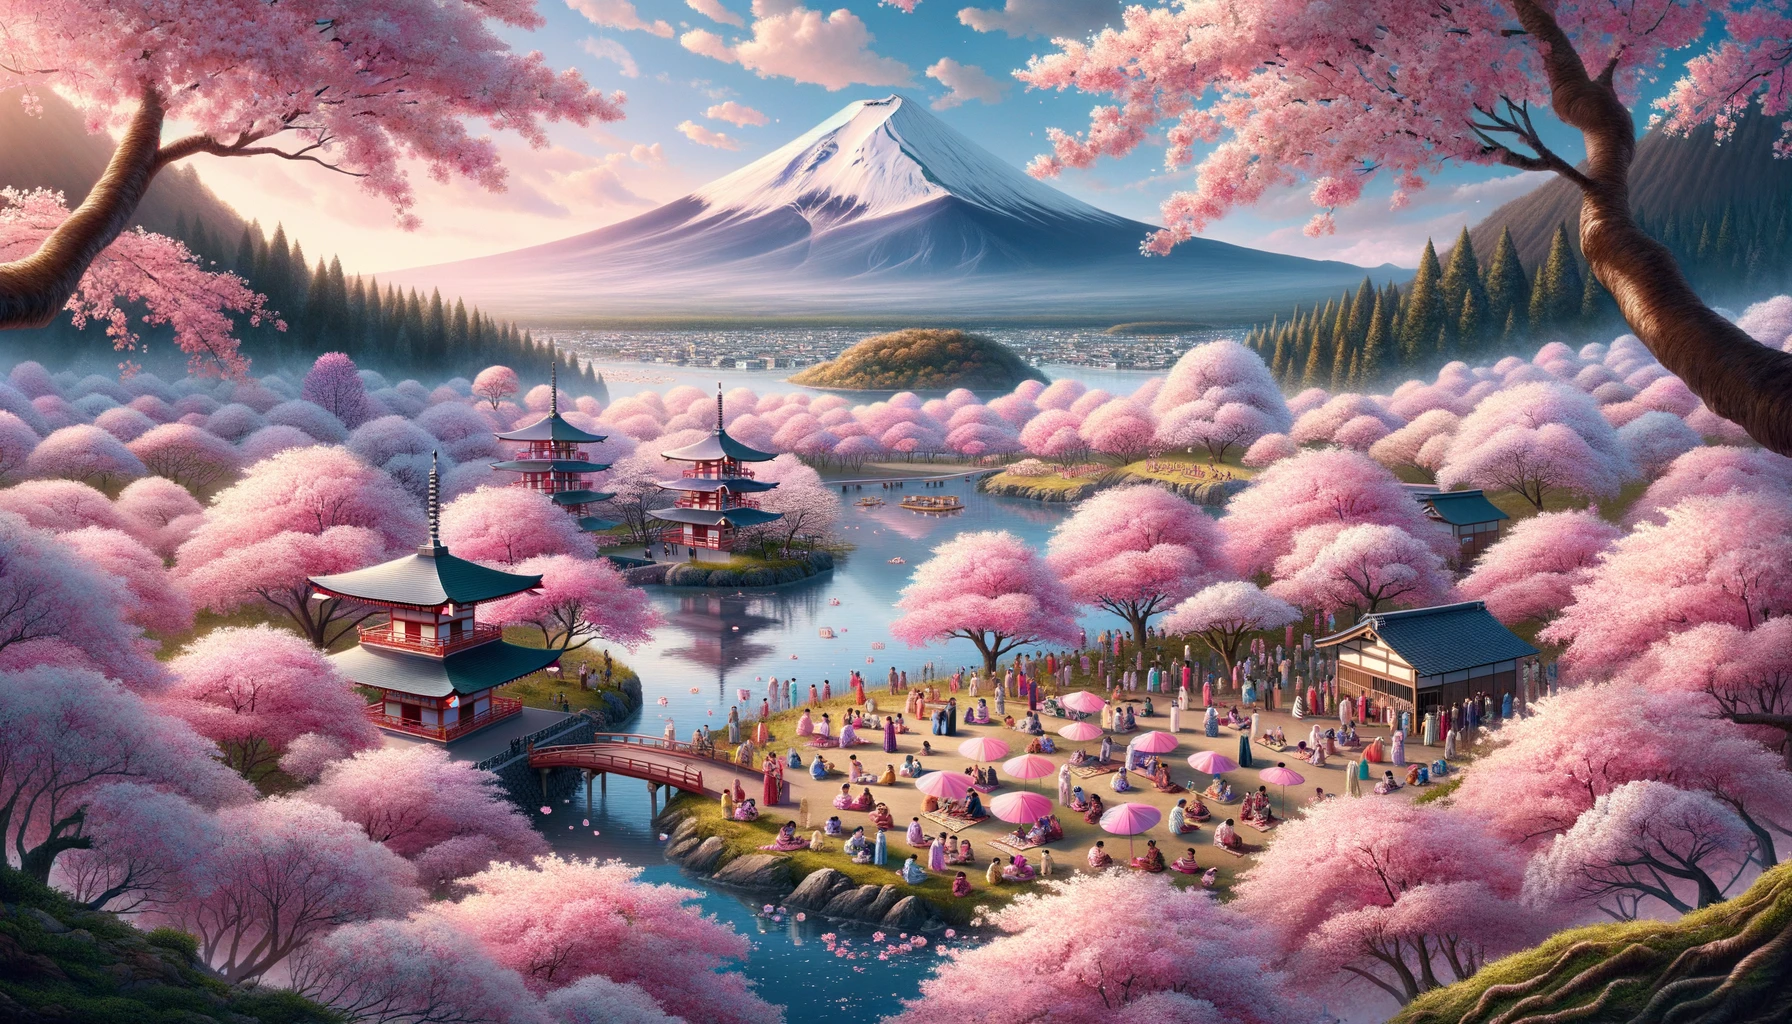 Digital art of a sakura festival in the heart of Japan. The land is awash with the pink hue of cherry blossoms, their fragrance filling the air. Mount Fuji, with its iconic shape, serves as a backdrop, adding to the scene's allure. A pond, nestled among the trees, reflects the sky, the blossoms, and the mountain, creating a picture-perfect setting. Local folks, some in kimonos, enjoy picnics under the sakura canopy, their joy evident in their smiles and laughter.